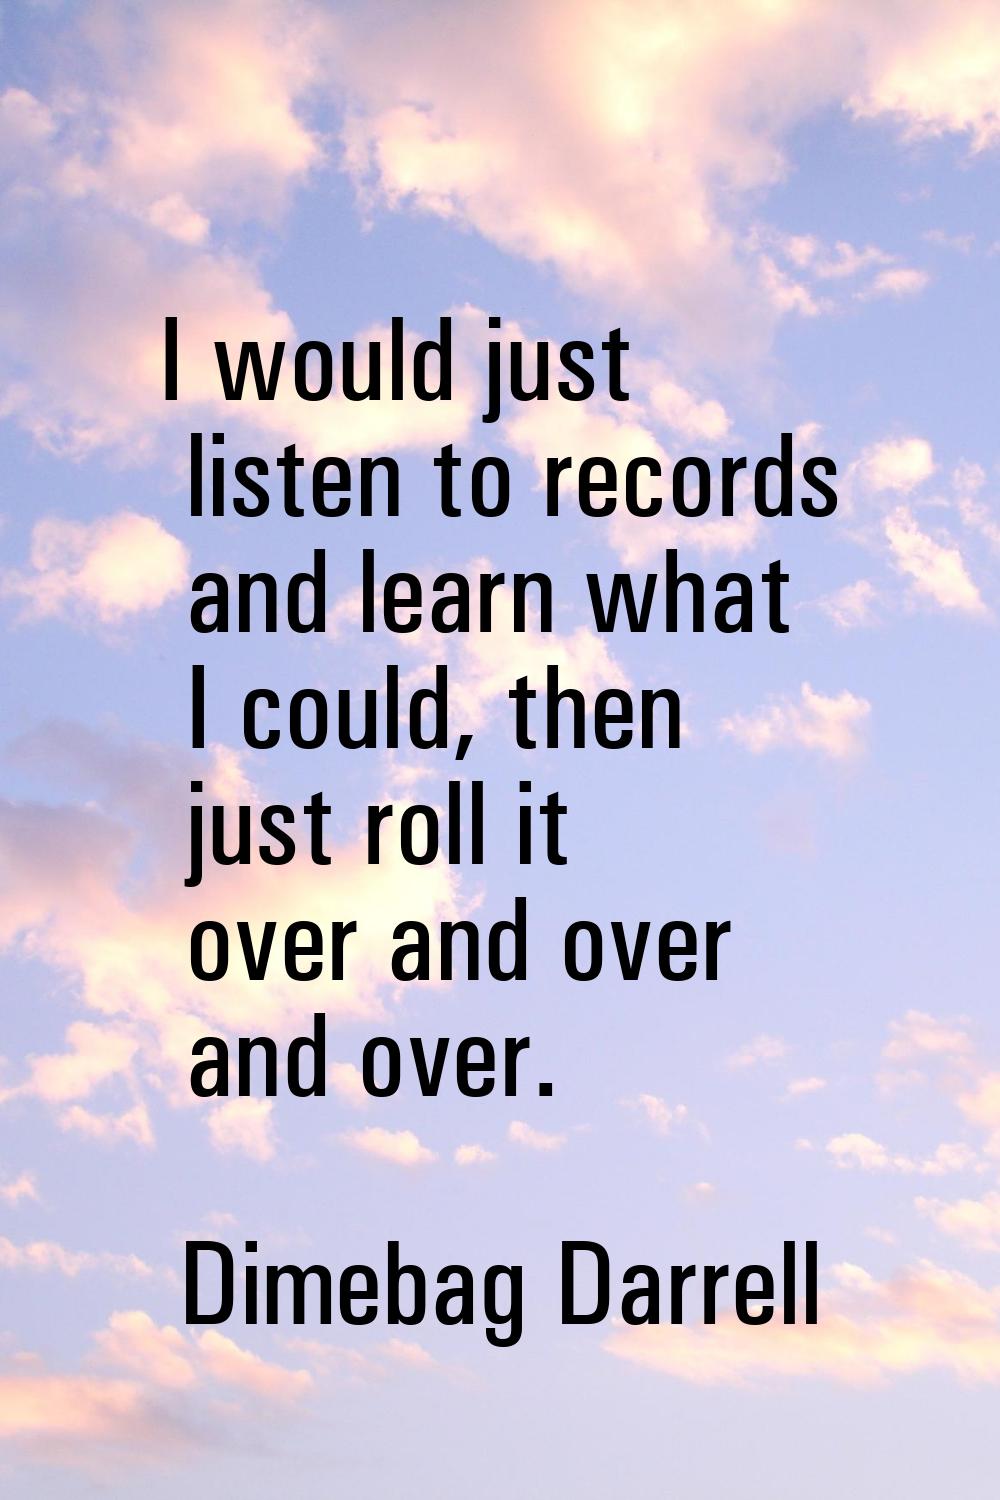 I would just listen to records and learn what I could, then just roll it over and over and over.